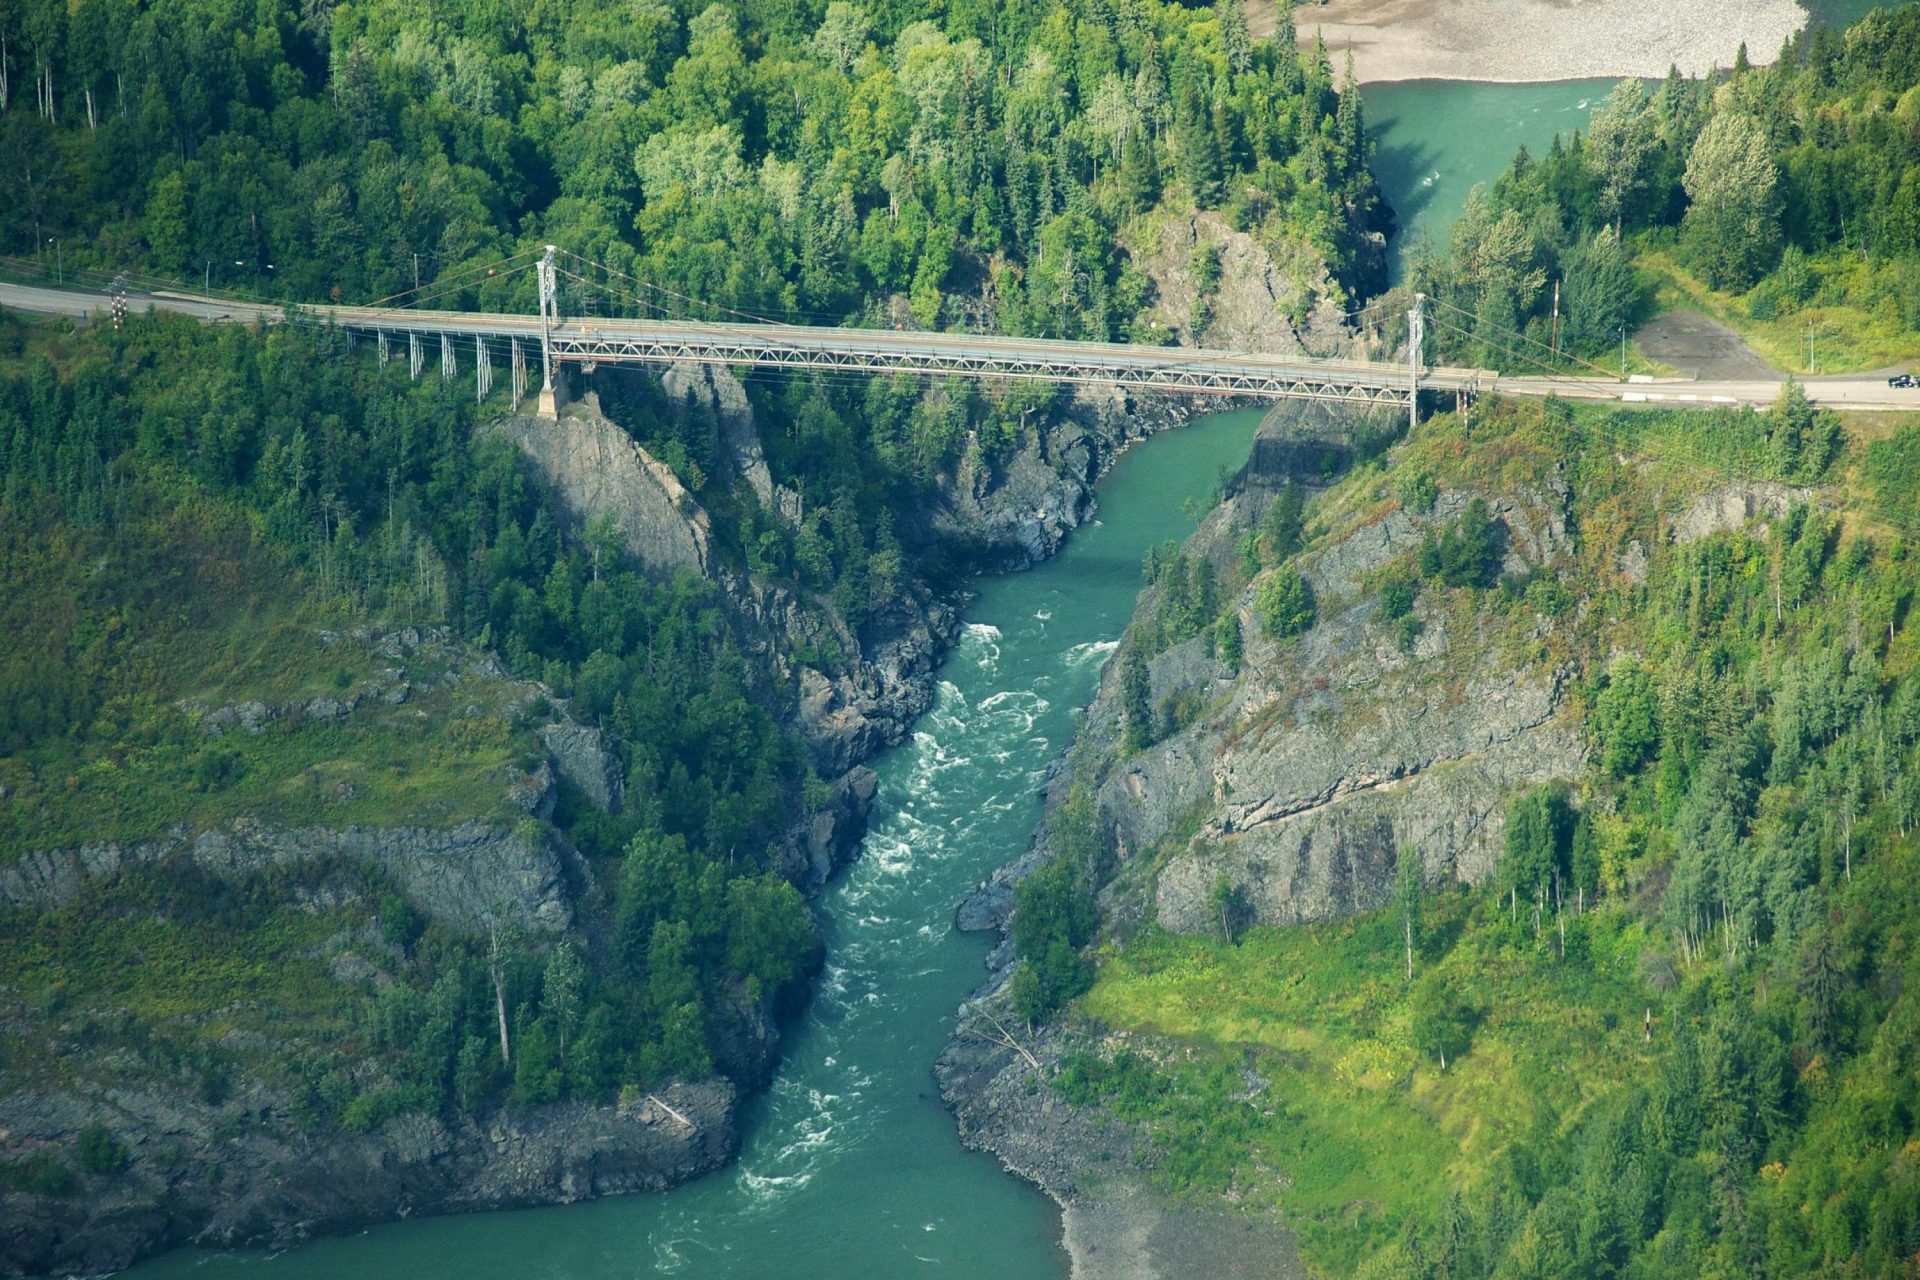 The Hagwilget Canyon Bridge over the Bulkley River in Gitxsan territory, B.C. Several Aboriginal youth have attempted or committed suicide at the bridge. Photo by Sam Beebe/Flickr/Creative Commons